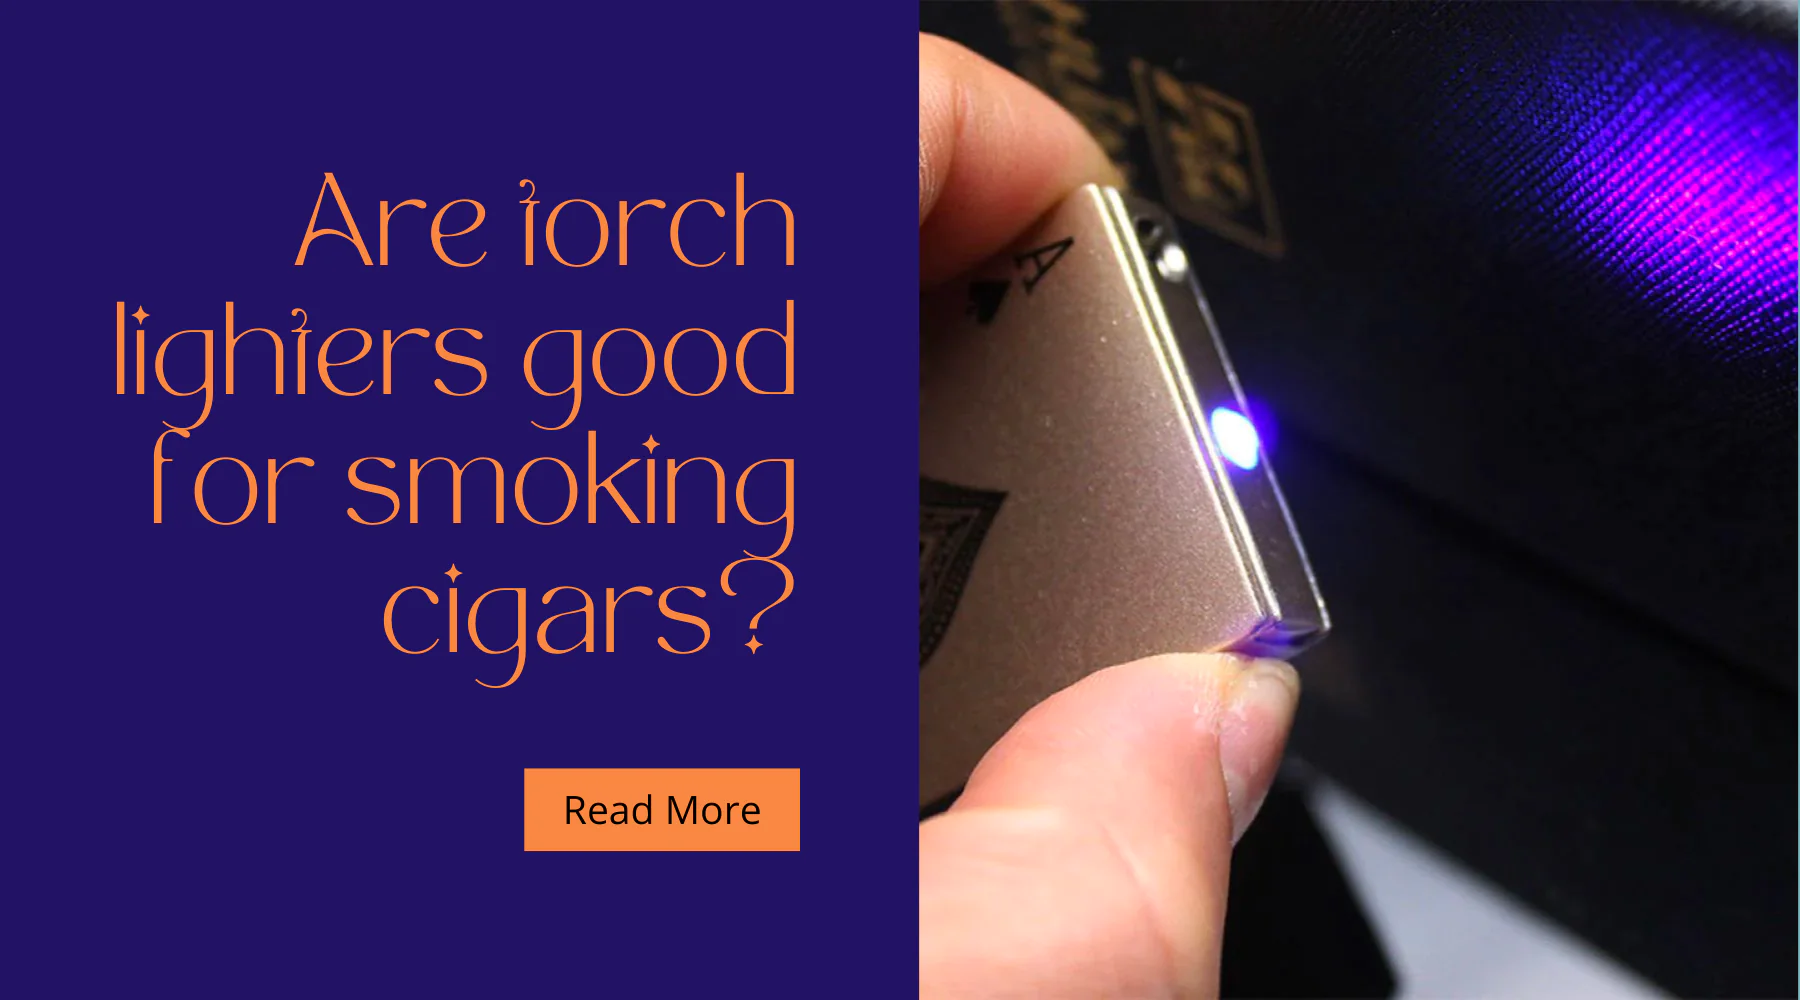 Are torch lighters good for smoking cigars?